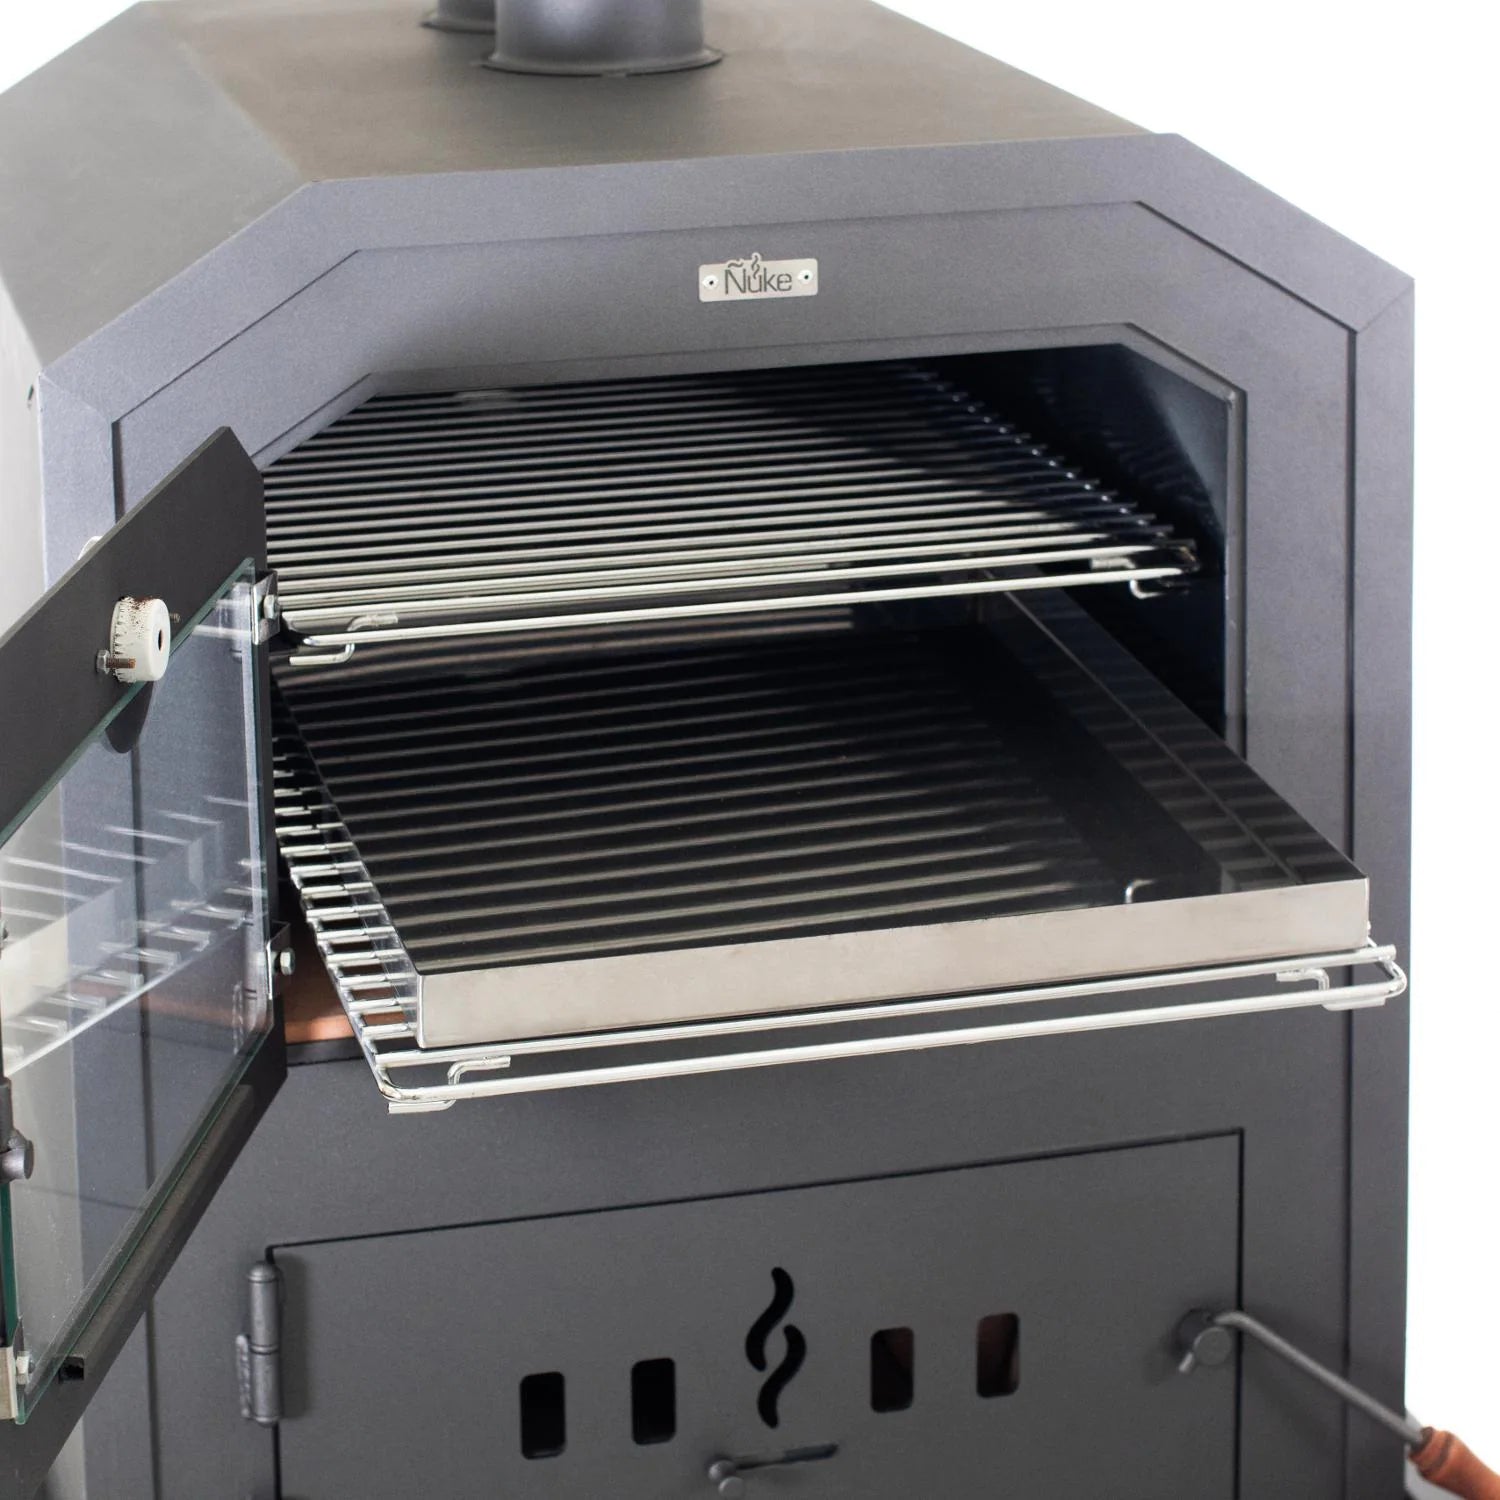 Nuke BBQ 24' Wood Fired Countertop Outdoor Oven -OVEN60CT02